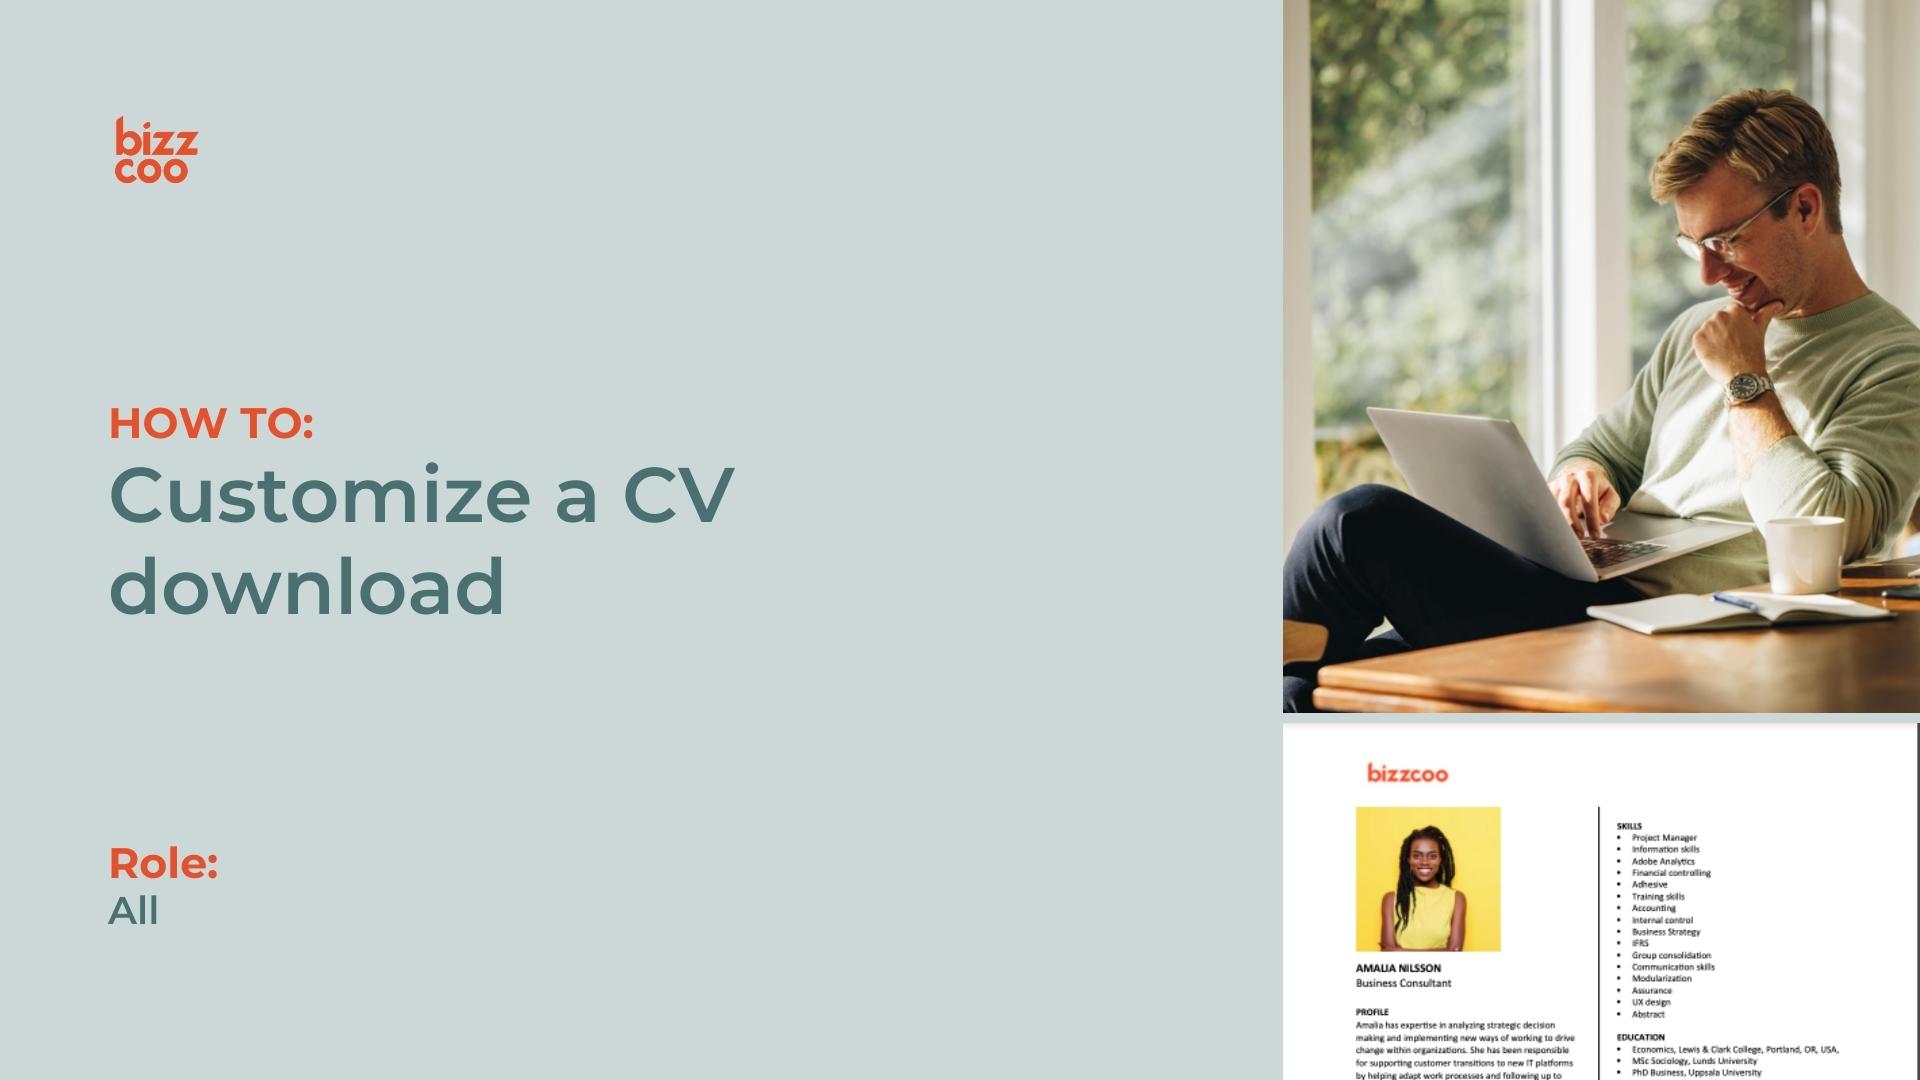 How to customize a CV download